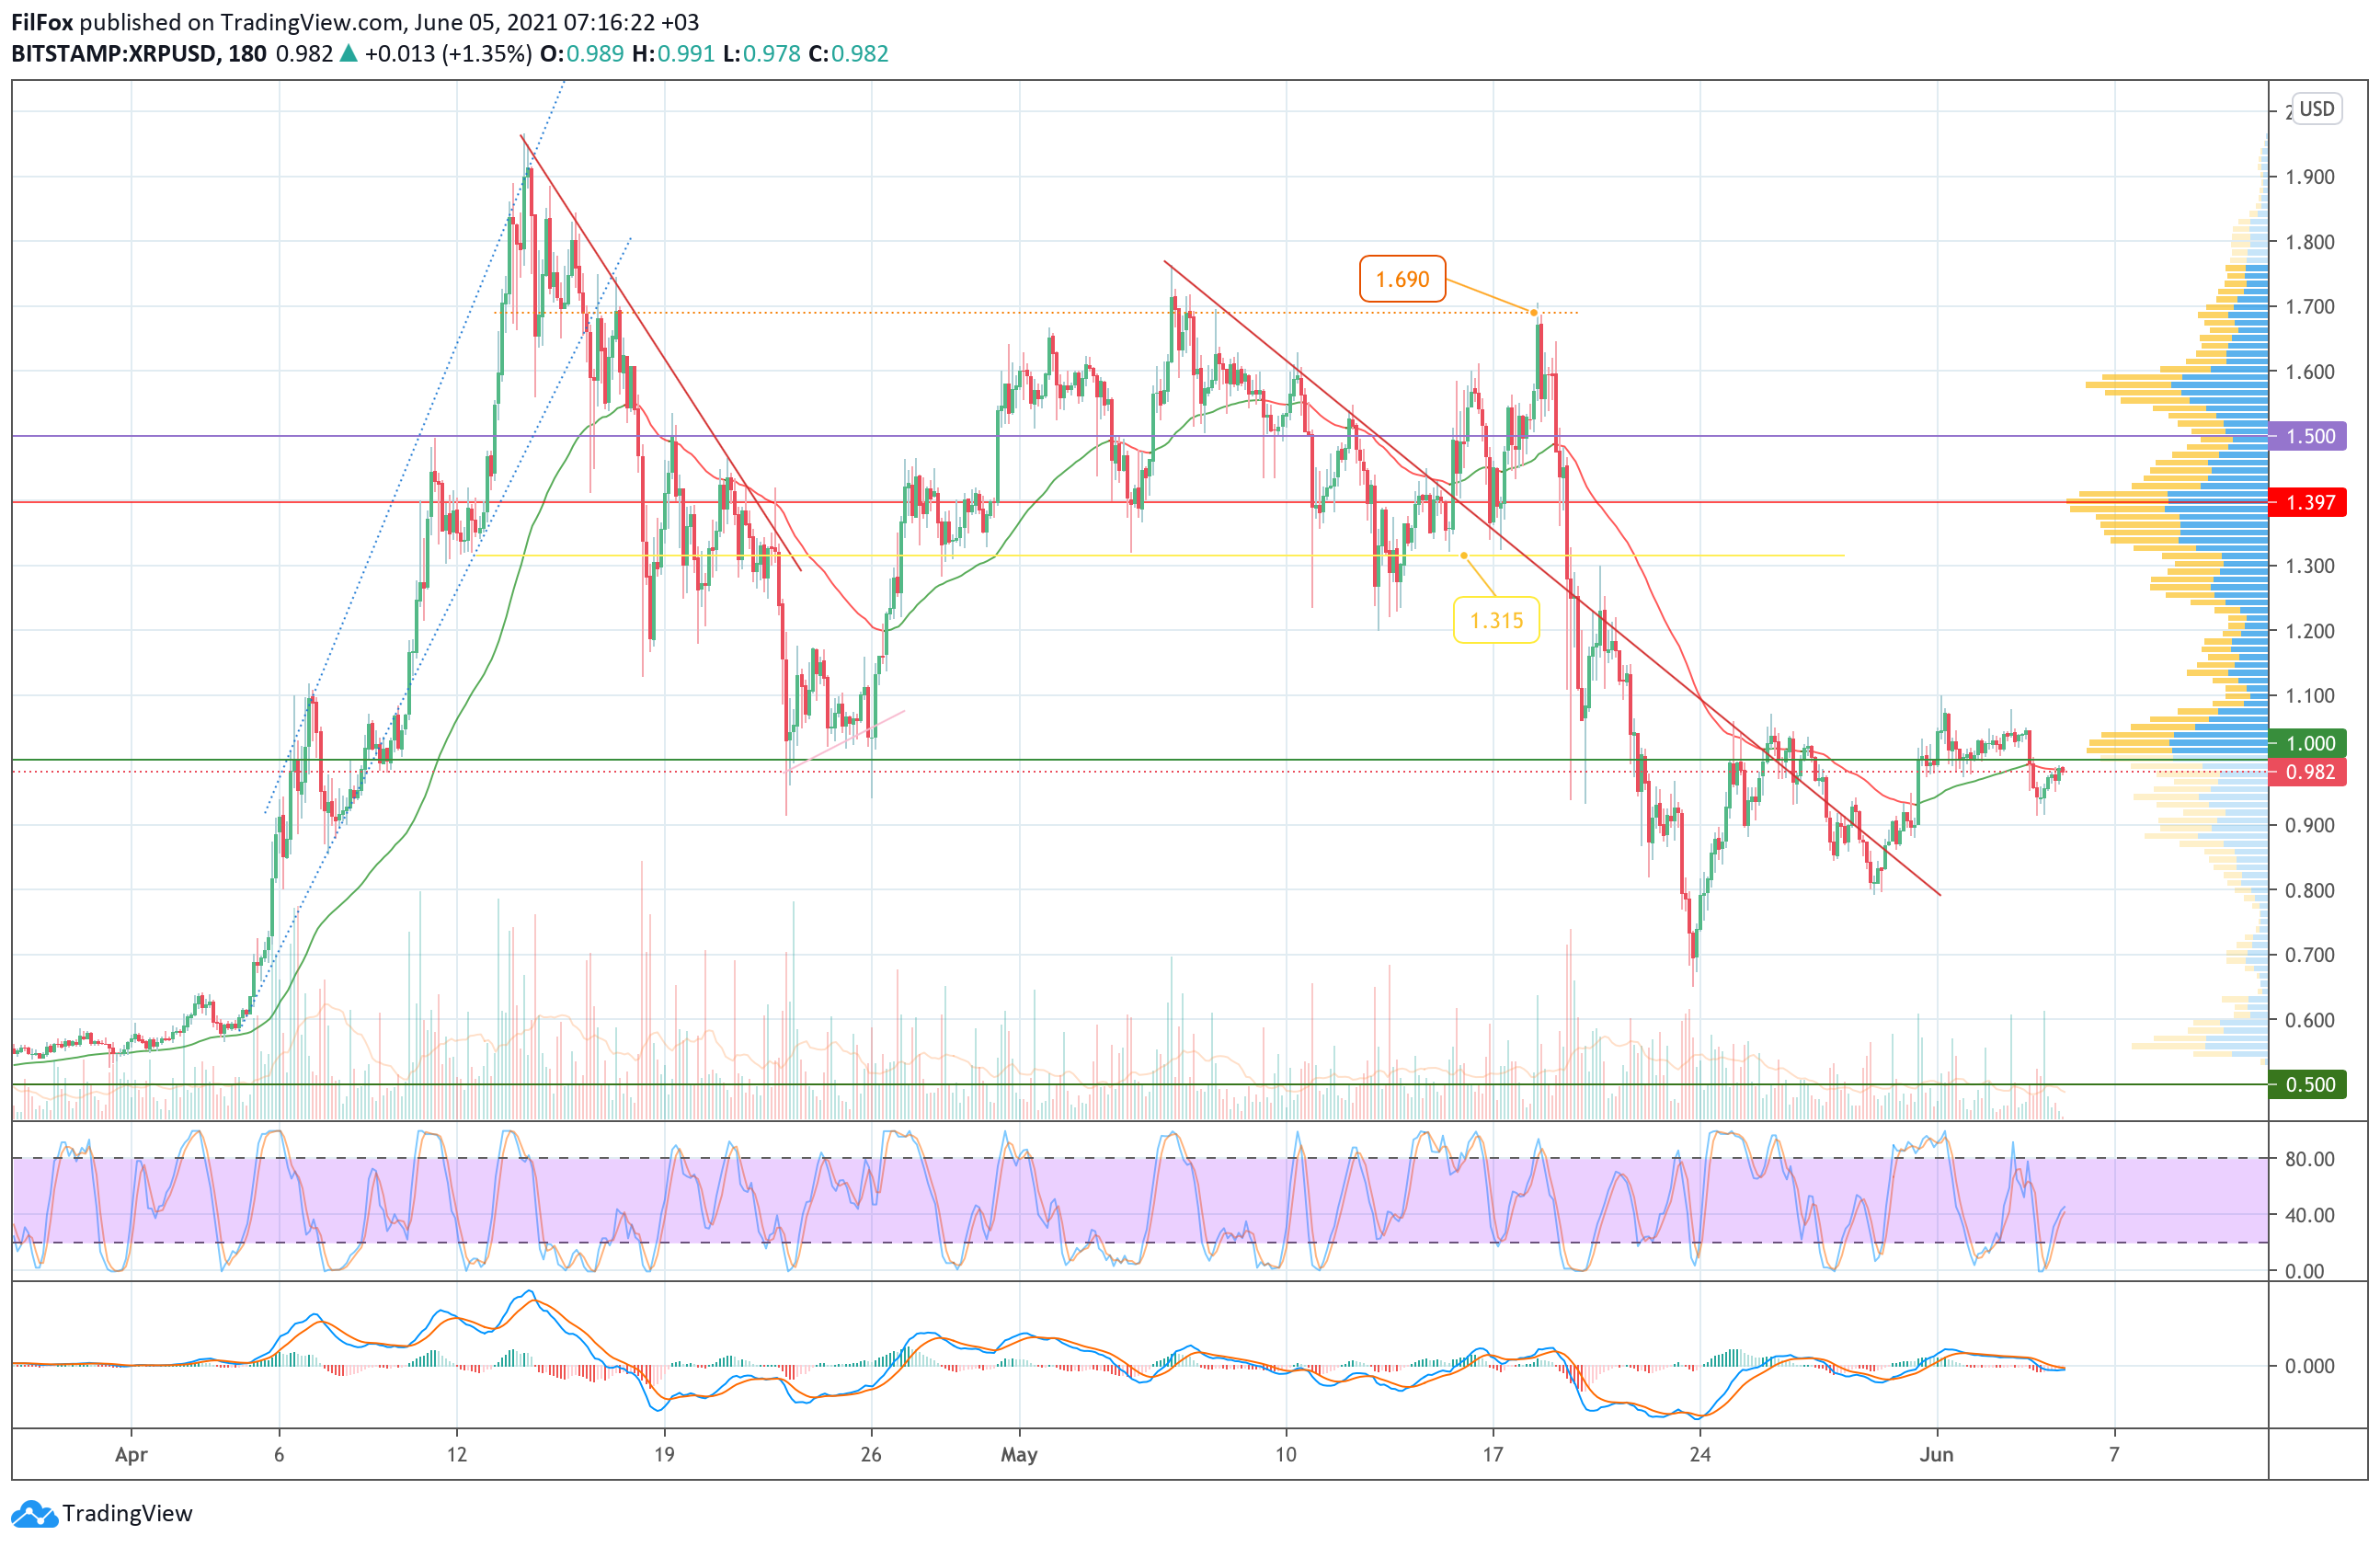 Analysis of prices for Bitcoin, Ethereum, XRP for 06/05/2021